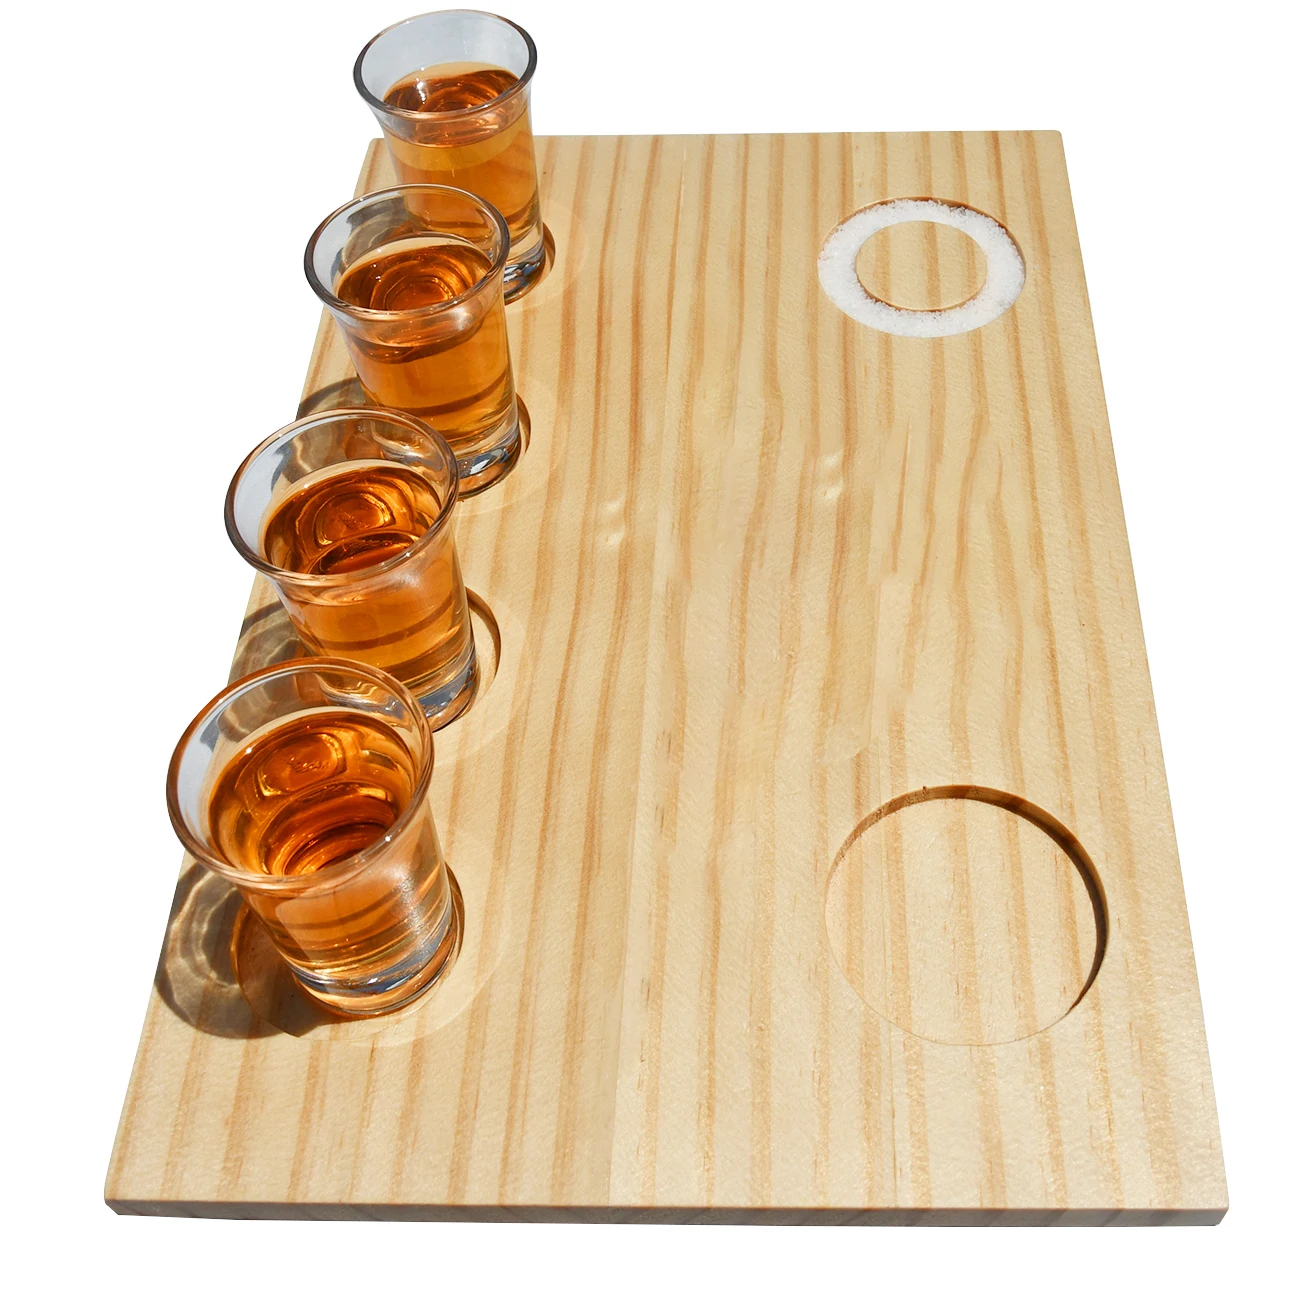 High Quality Wood Cup Holder Shot Glass Display Shot Glass Holder Thick Base For Heavy Duty Use